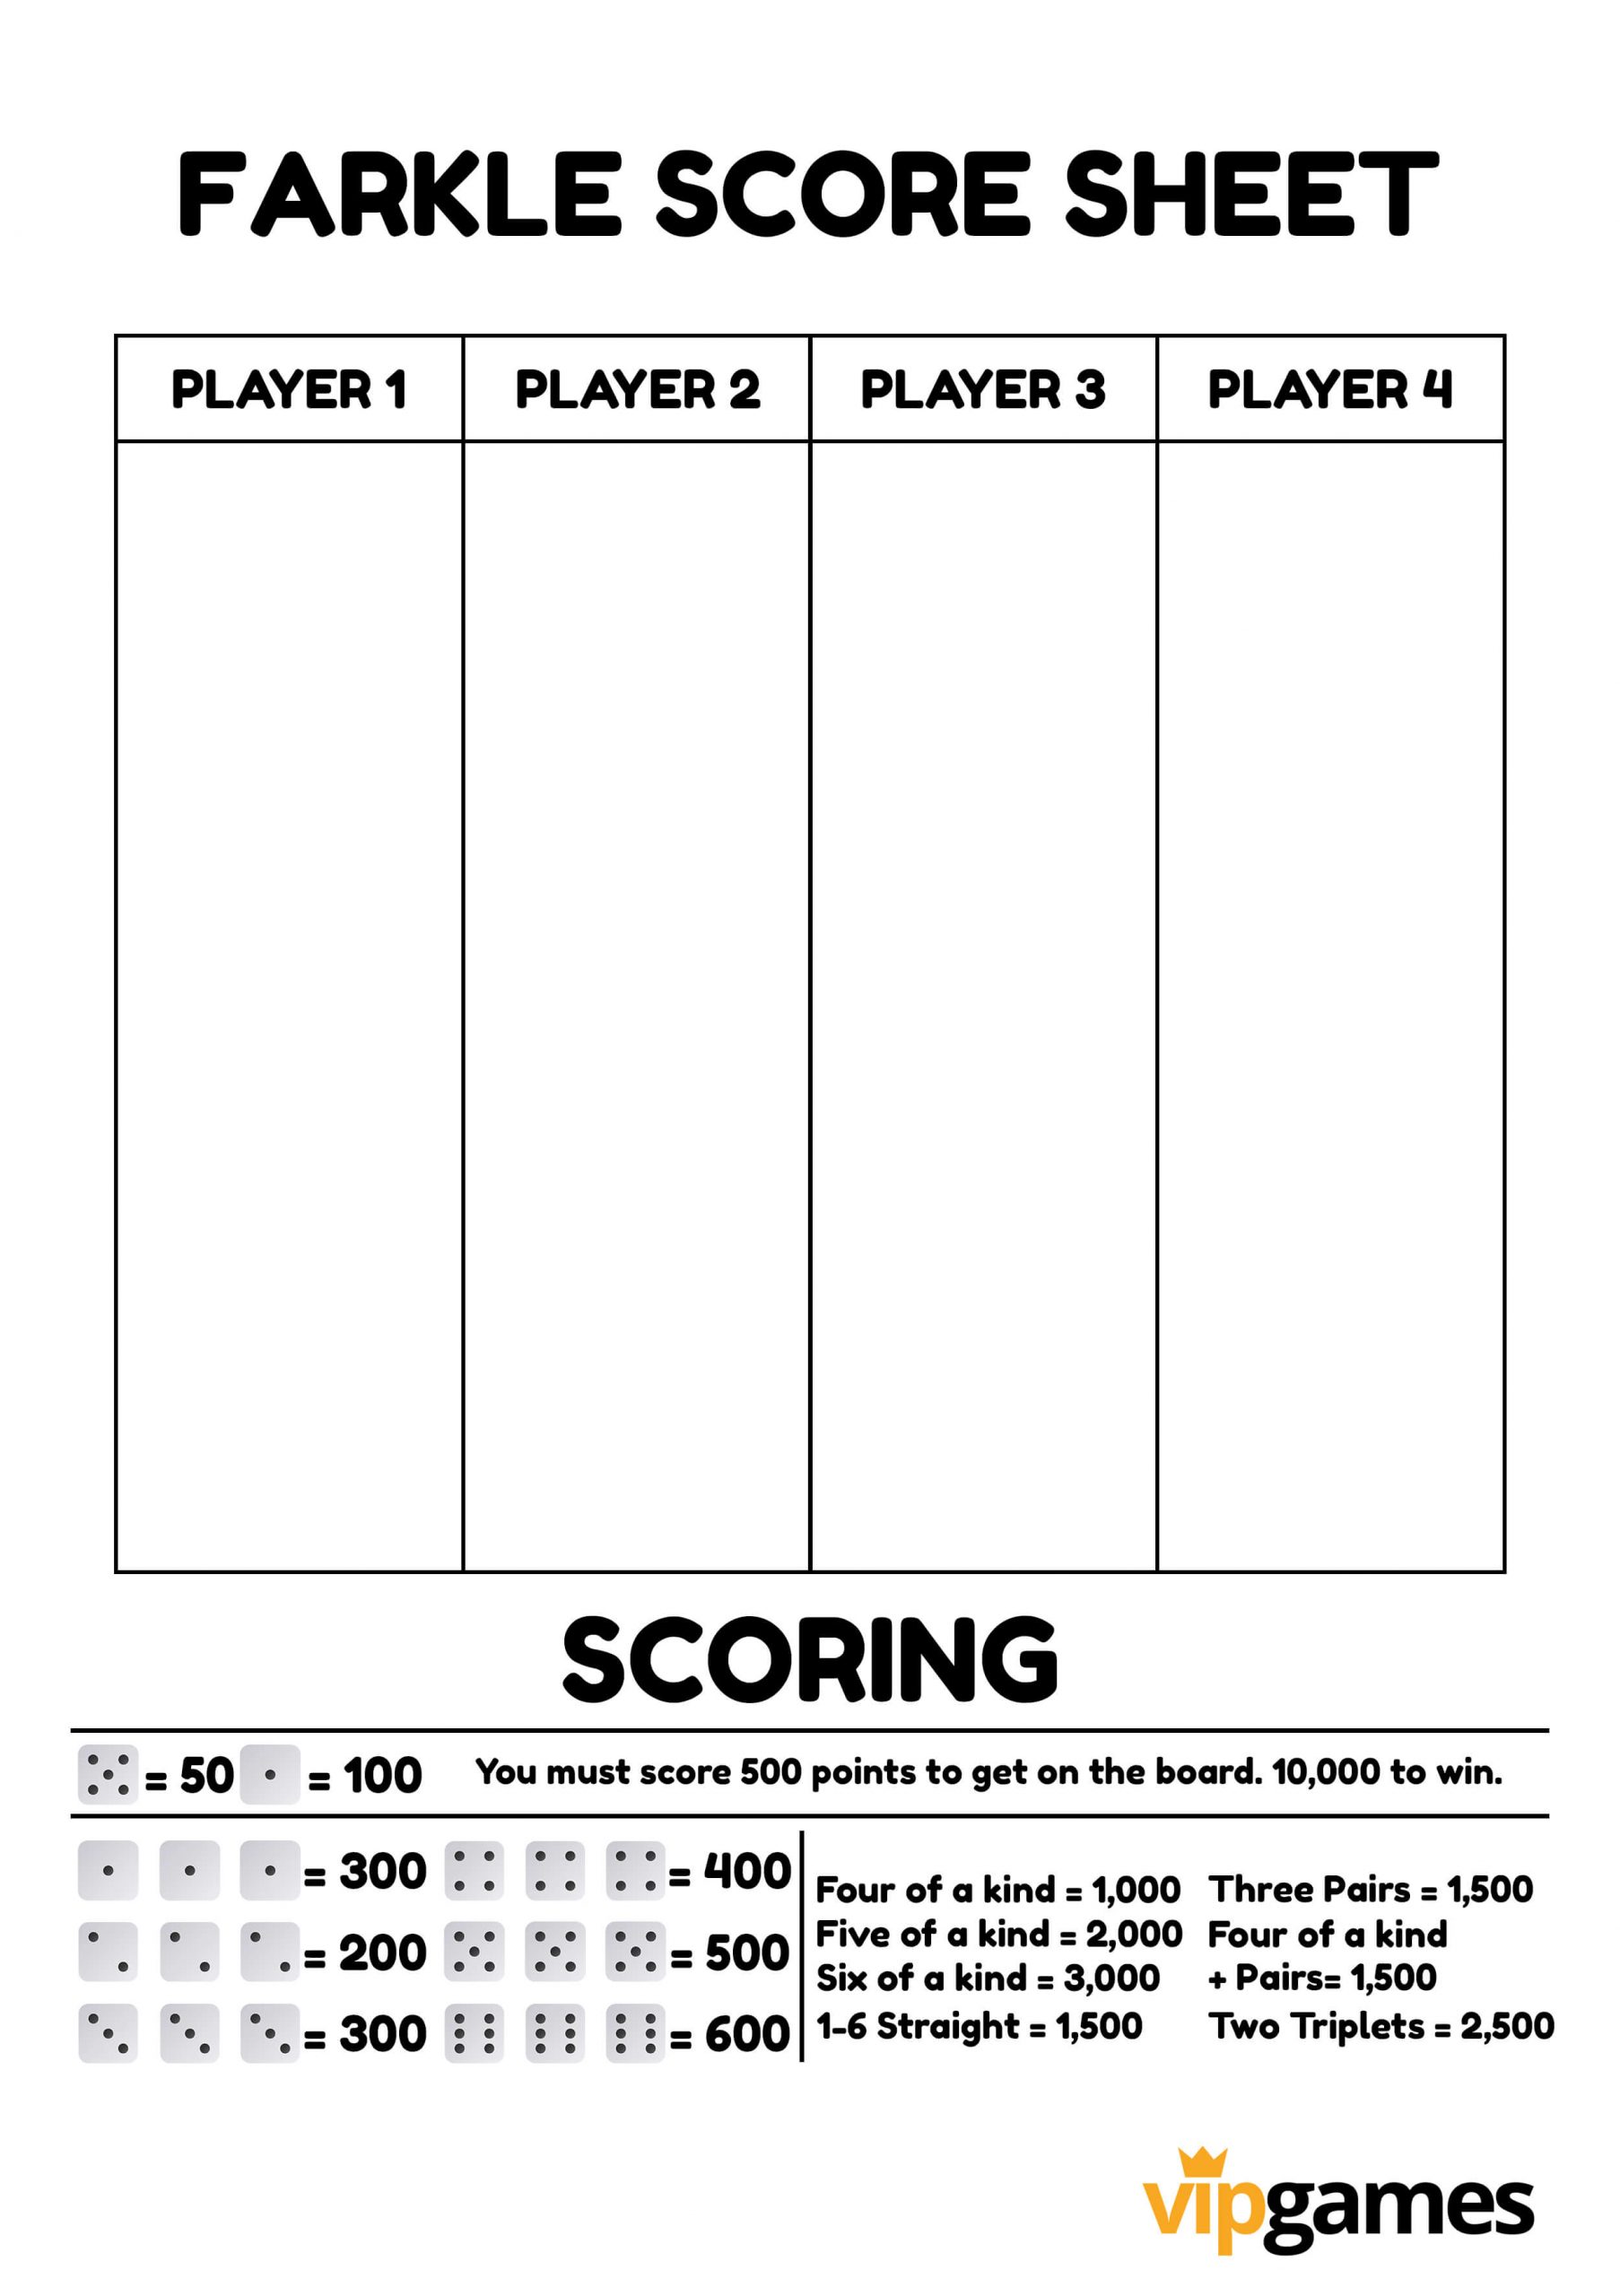 farkle rules printable and scoring